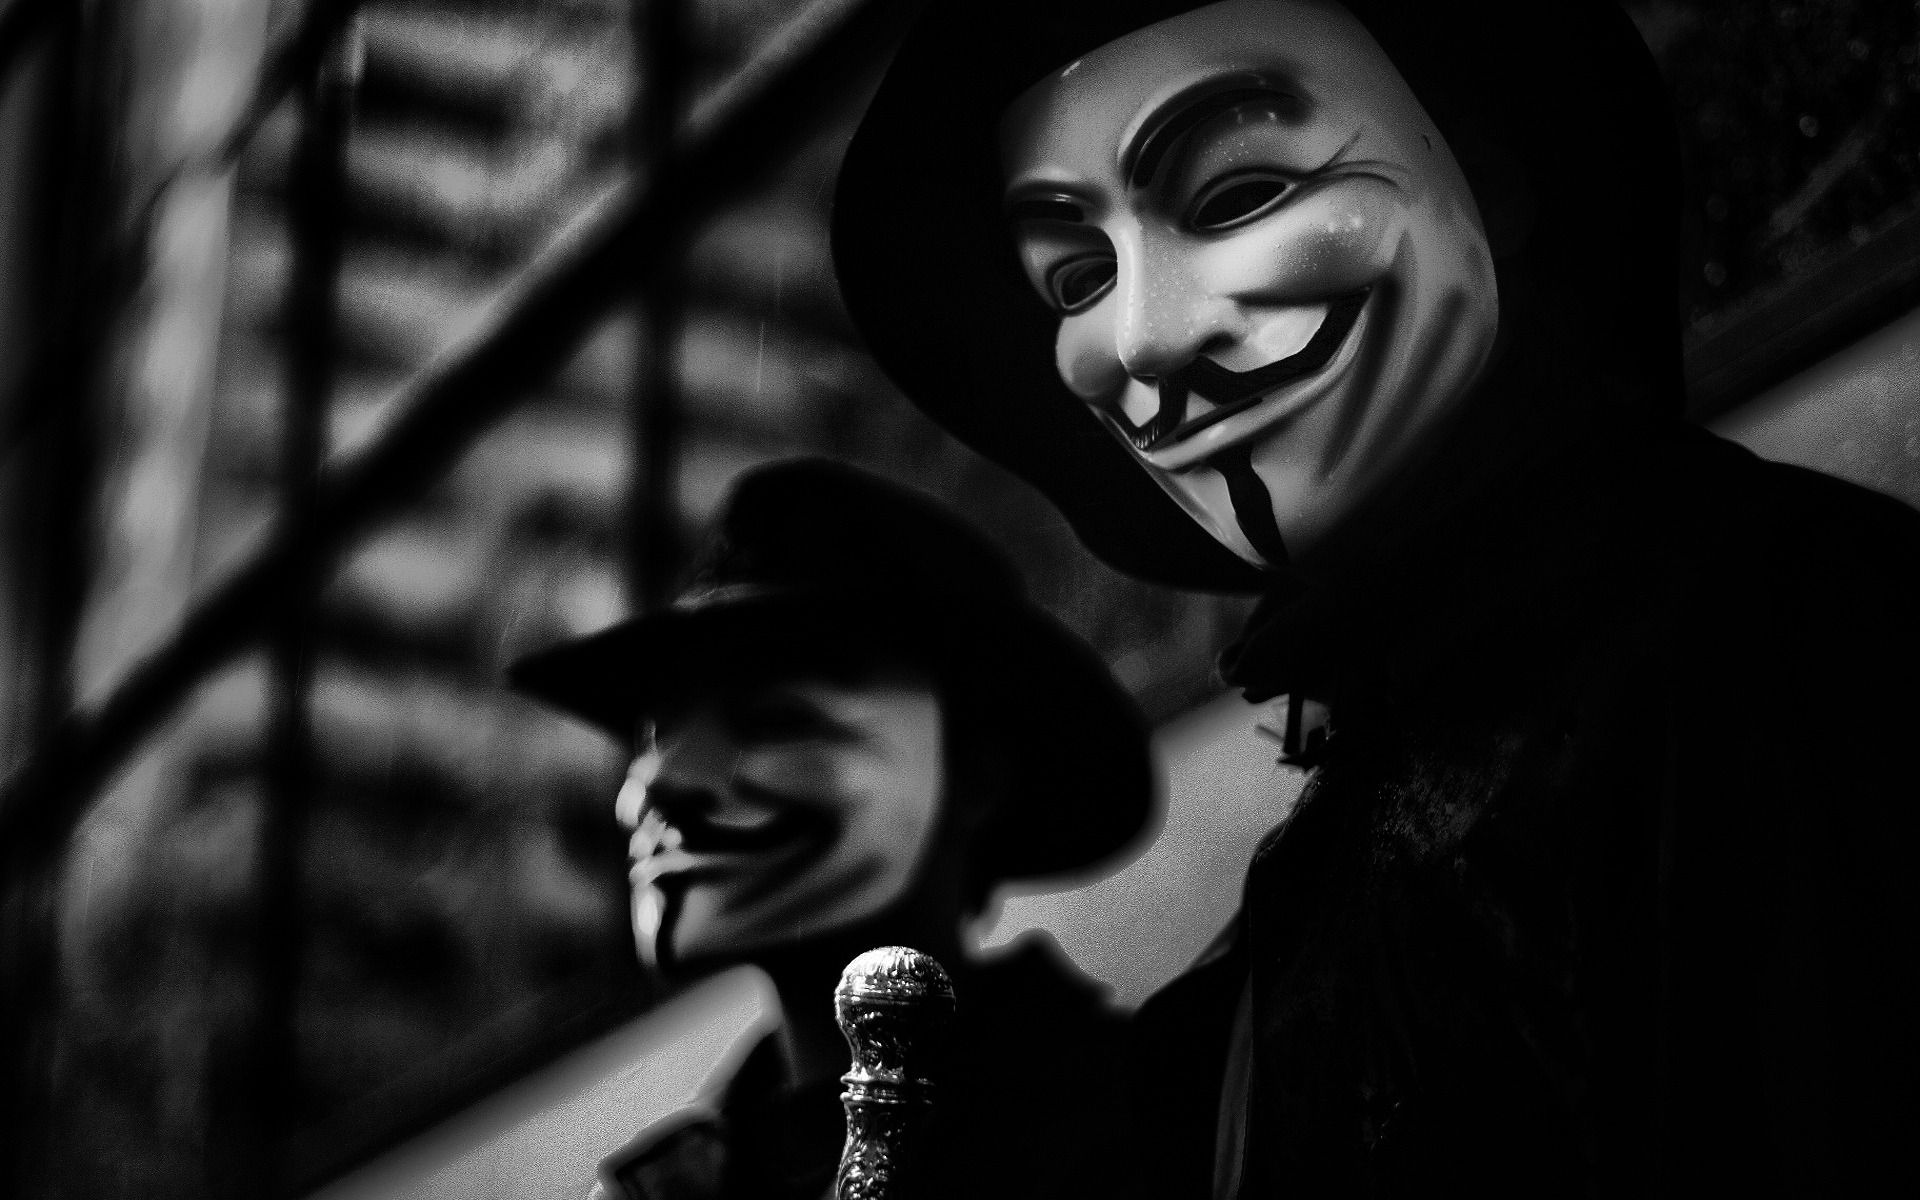 Film V for Vendetta wallpapers and images - wallpapers, pictures